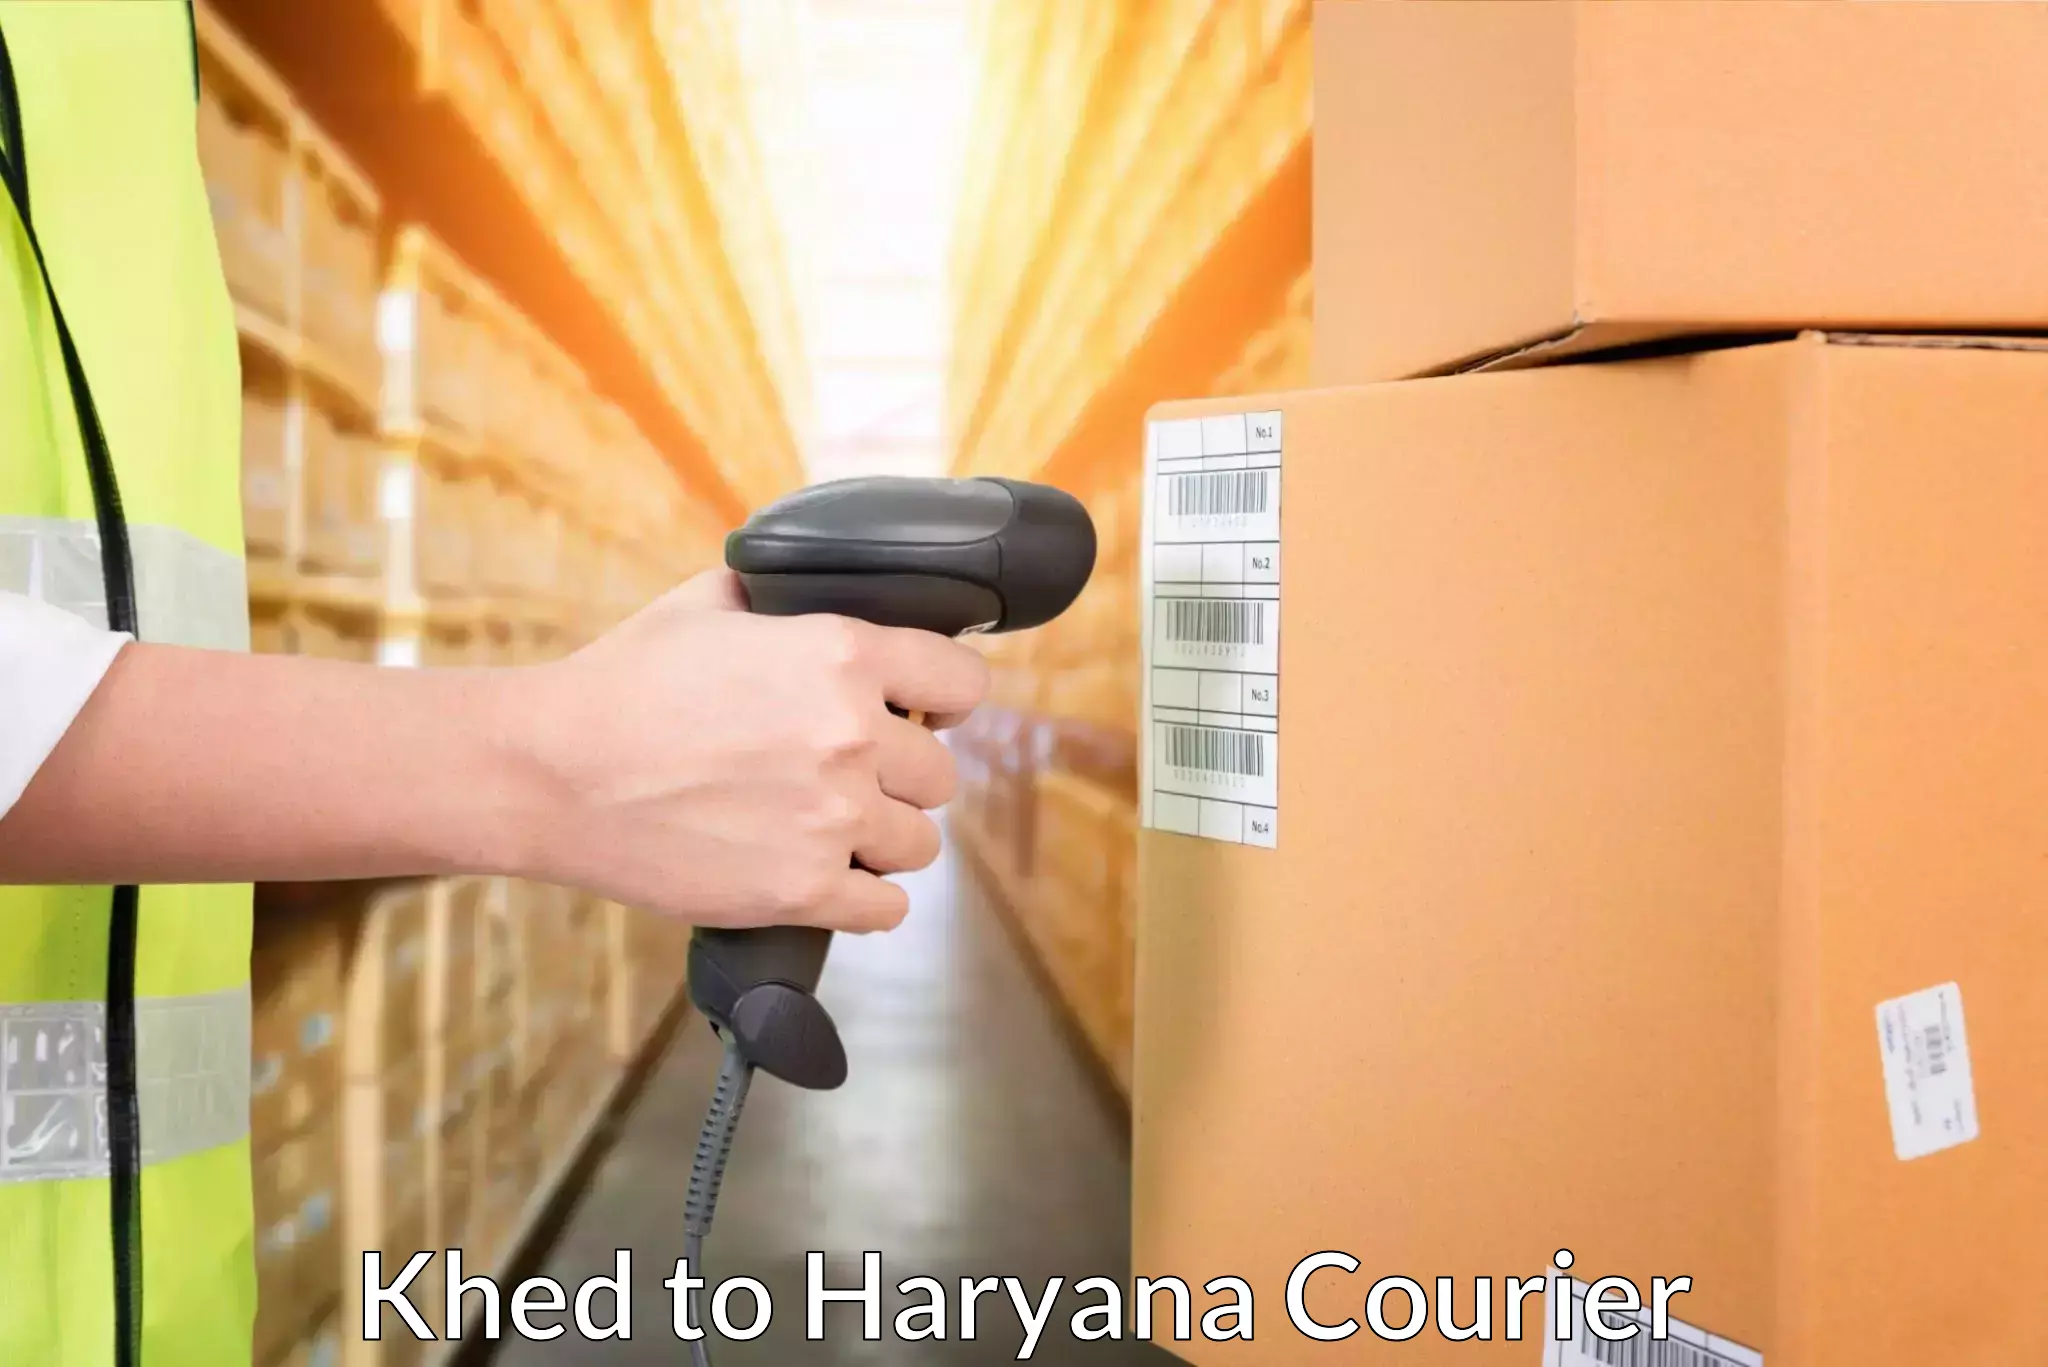 Package delivery network Khed to Sonipat